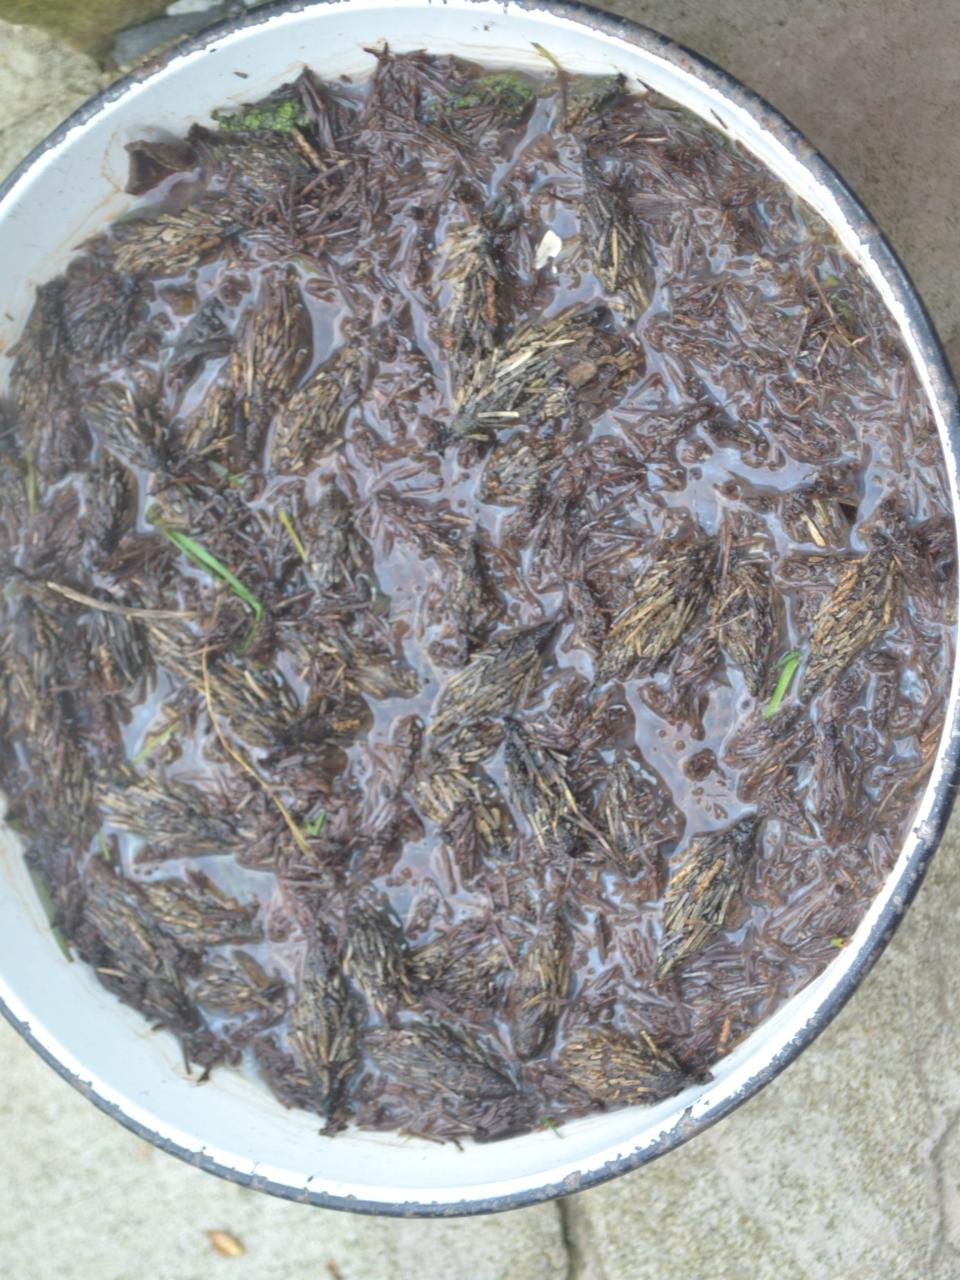 Handpicking the bags off the plants and submerging them in a bucket of soapy water to suffocate the larvae is one way to control bagworm.